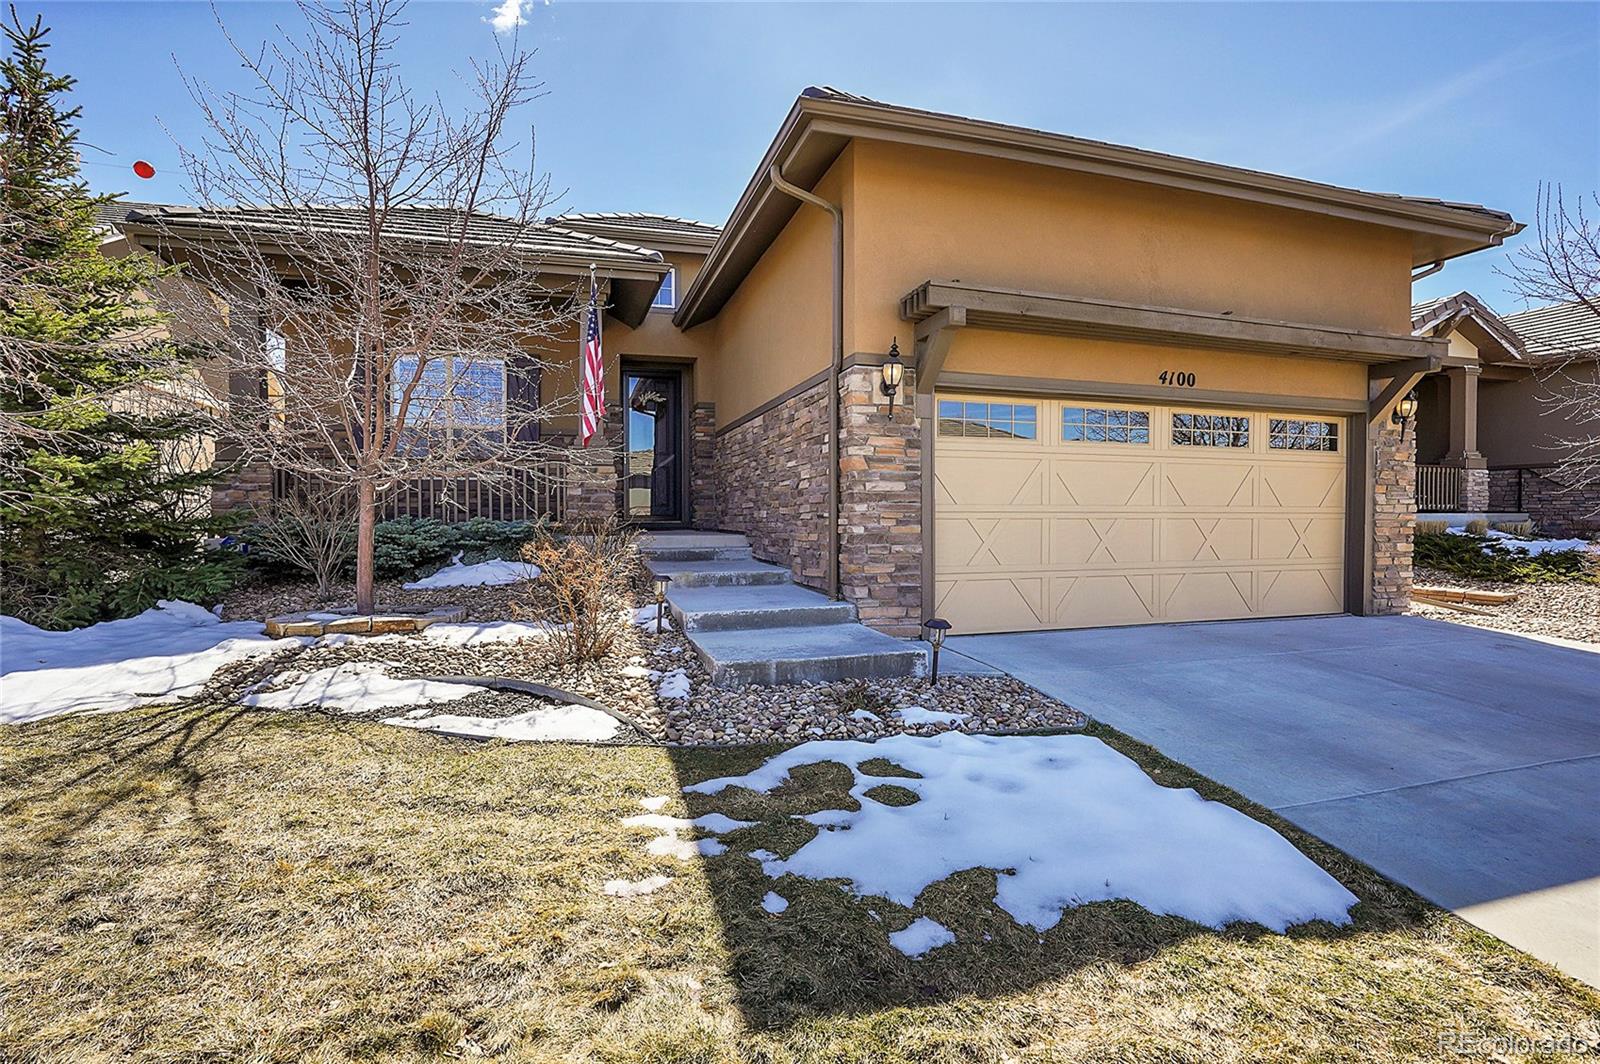 Report Image for 4100  Wild Horse Drive,Broomfield, Colorado